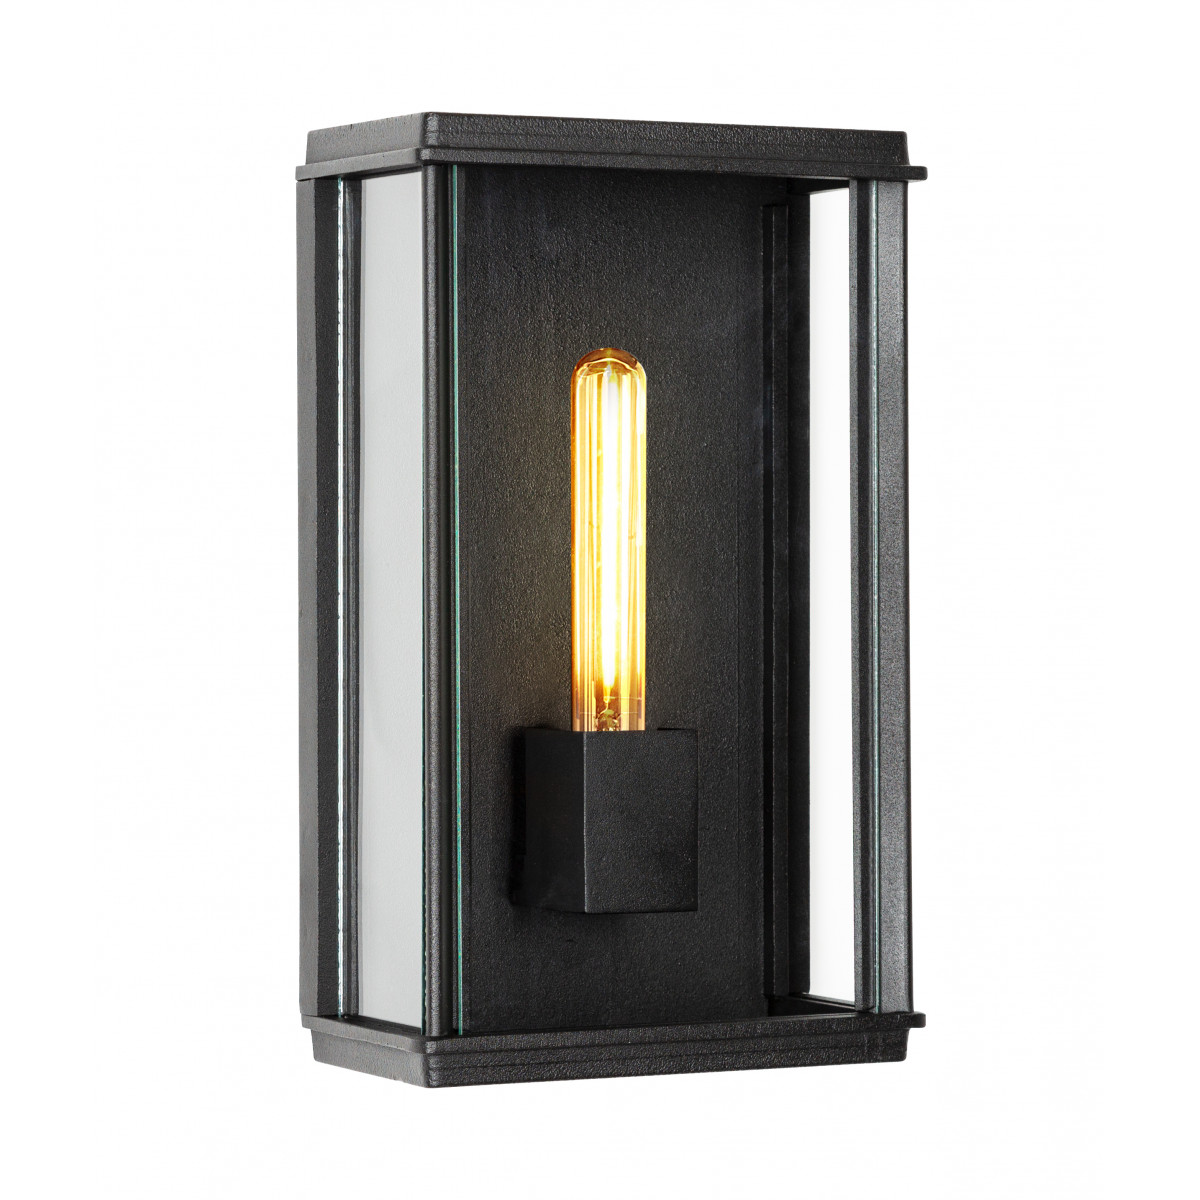 Modern exterior lighting beautiful black outdoor flush mount modern classic rectangle outdoor wall lamp with glass panels from KS outdoor lighting company